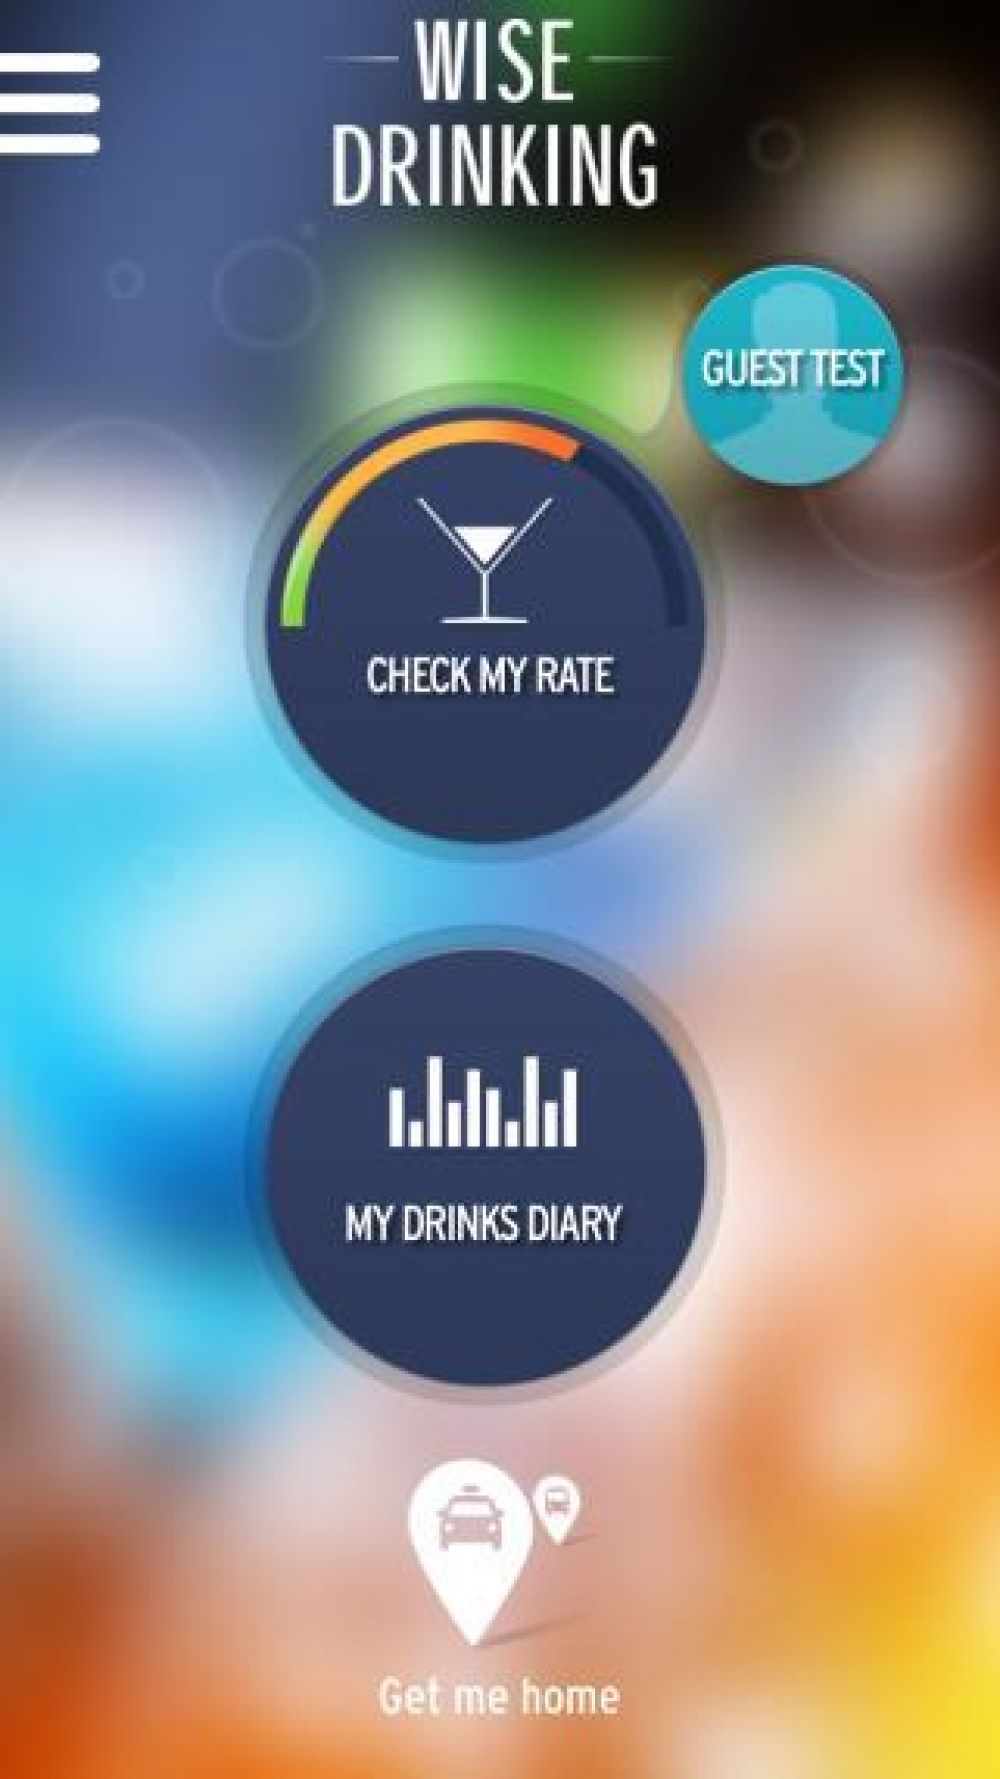 “Wise Drinking”: the first global App for responsible drinking